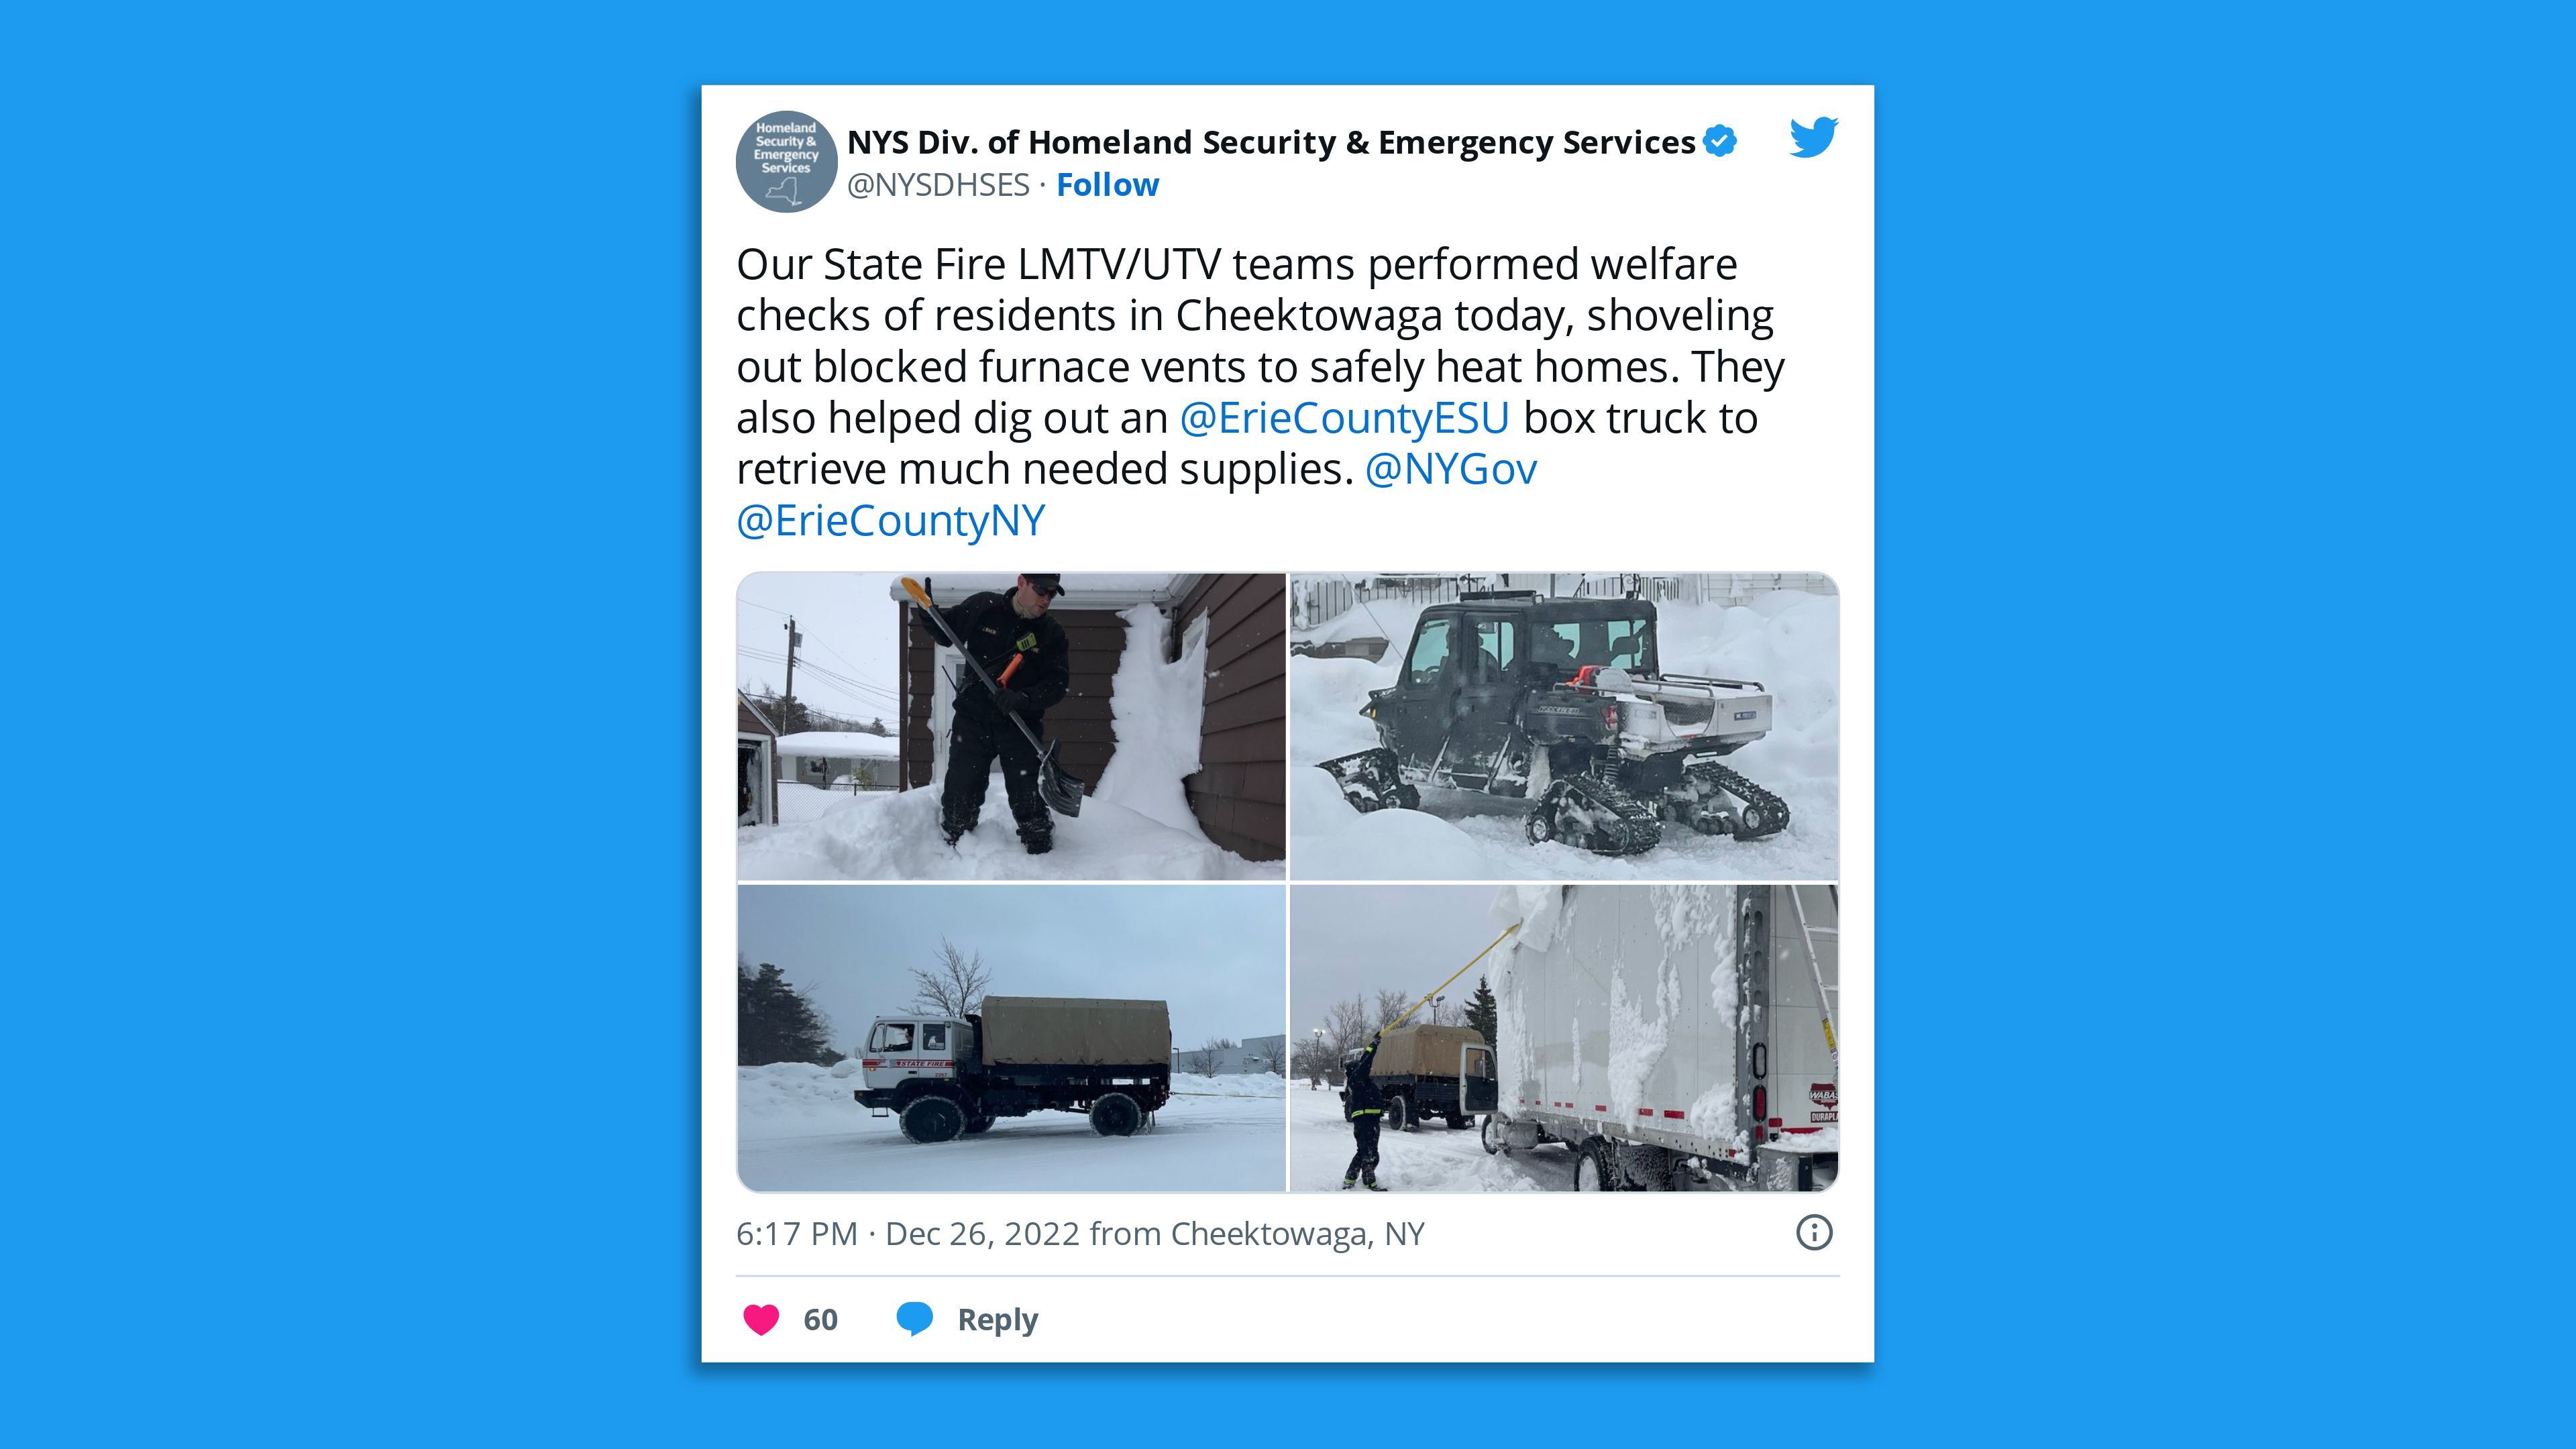 A screenshot of a tweet from the N.Y. Division of Homeland Security and Emergency Services featuring images of workers performing welfare checks in Eerie County residents.